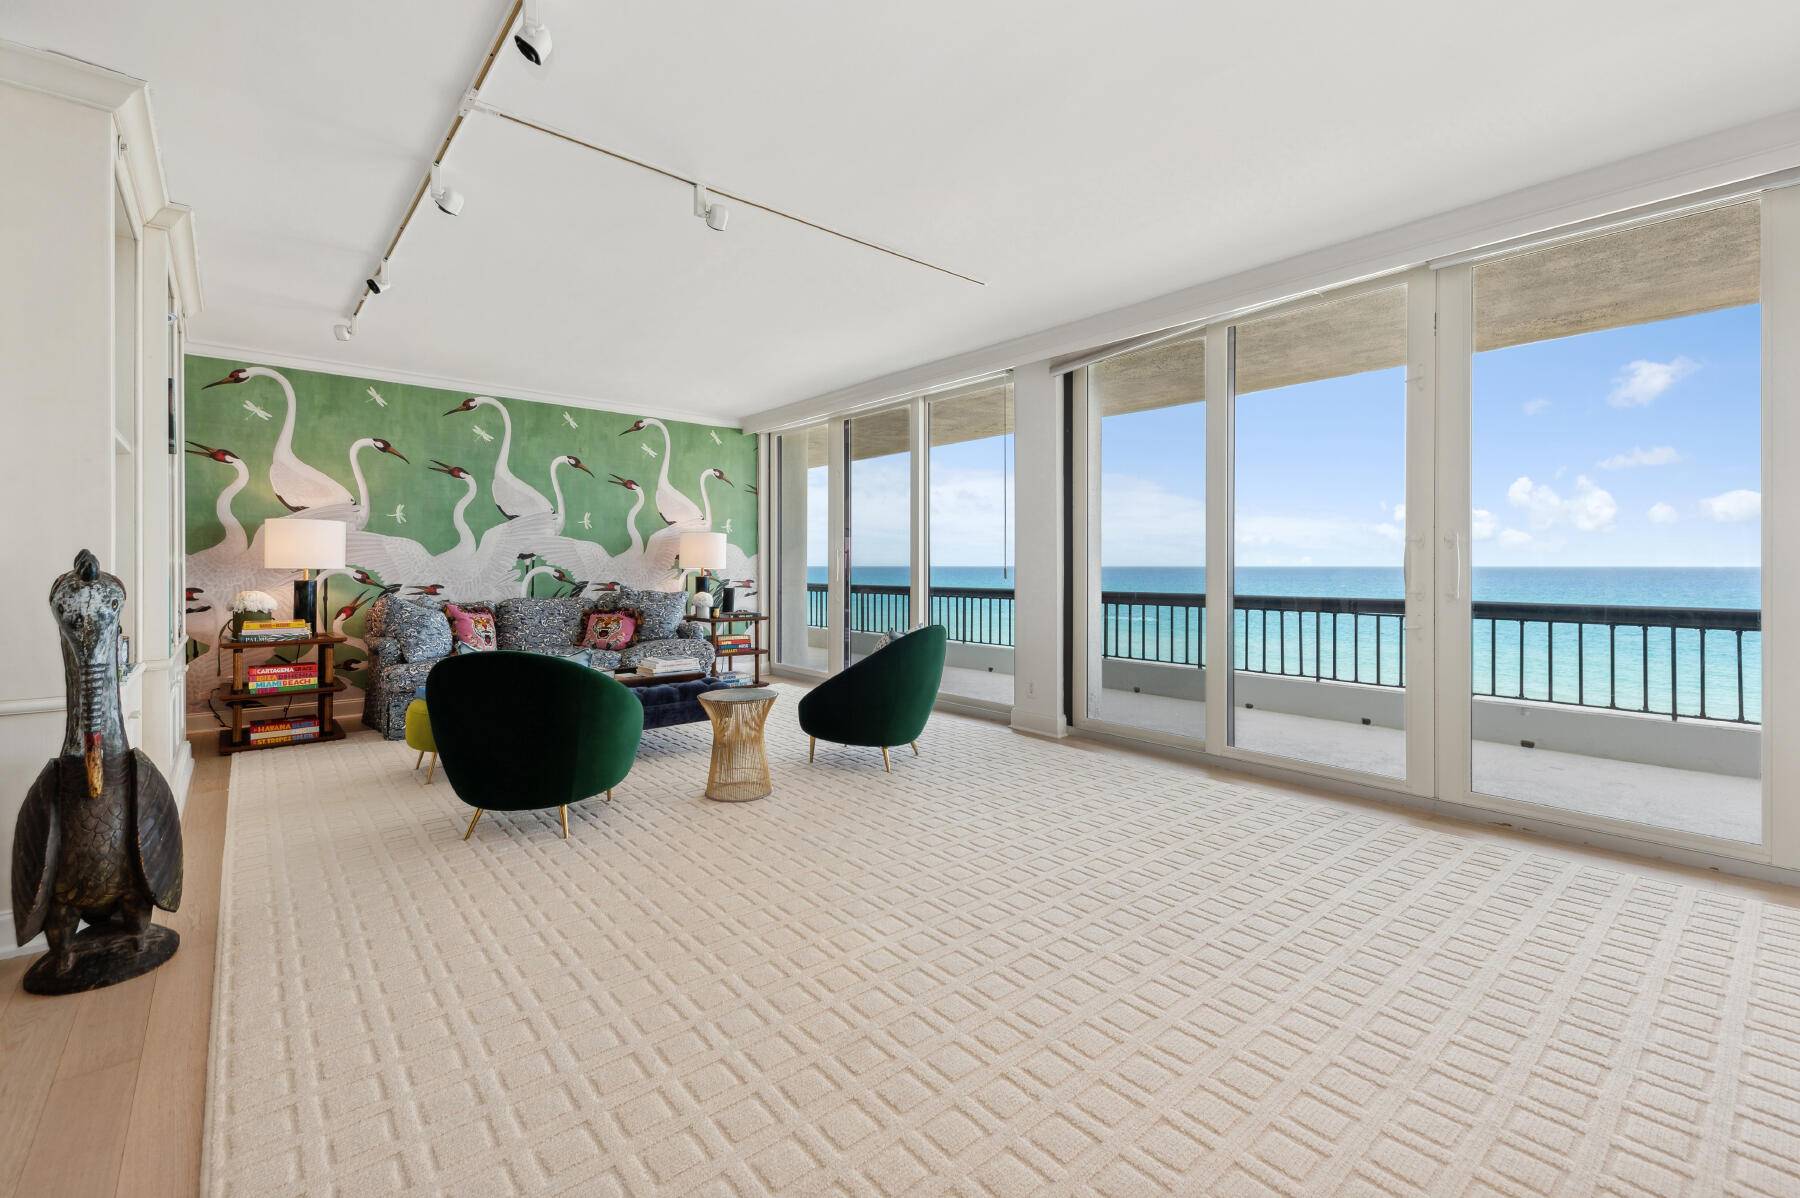 Direct Ocean Front at Beach Point, one of Palm Beaches most highly coveted addresses.